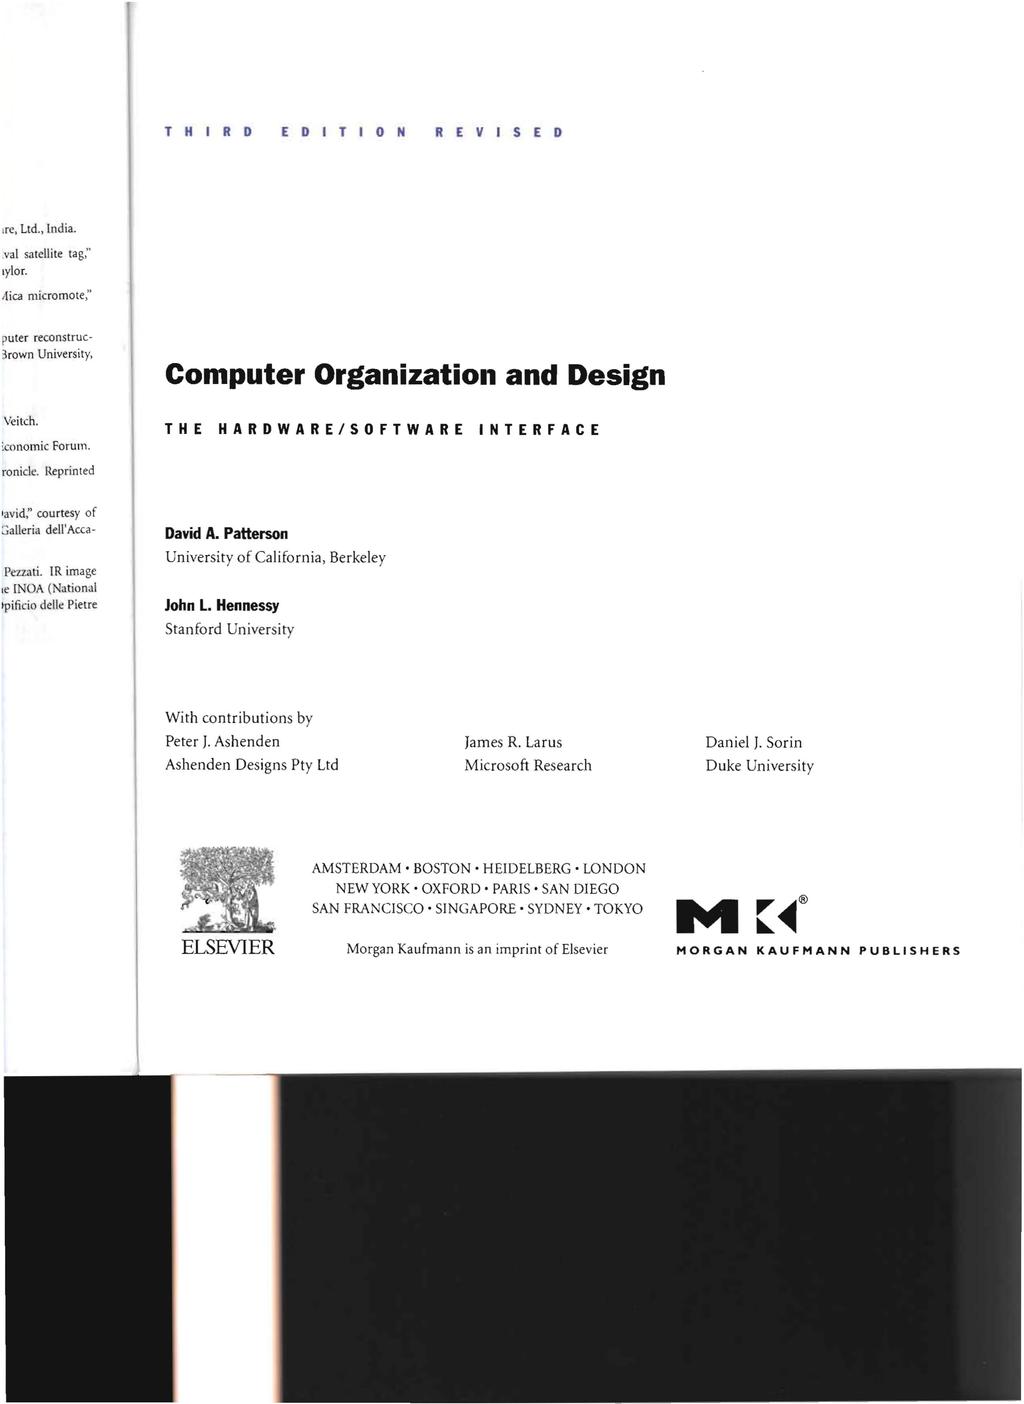 T H I R D EDITION REVISED Computer Organization and Design THE HARDWARE/SOFTWARE INTERFACE David A. Patterson University of California, Berkeley John L.